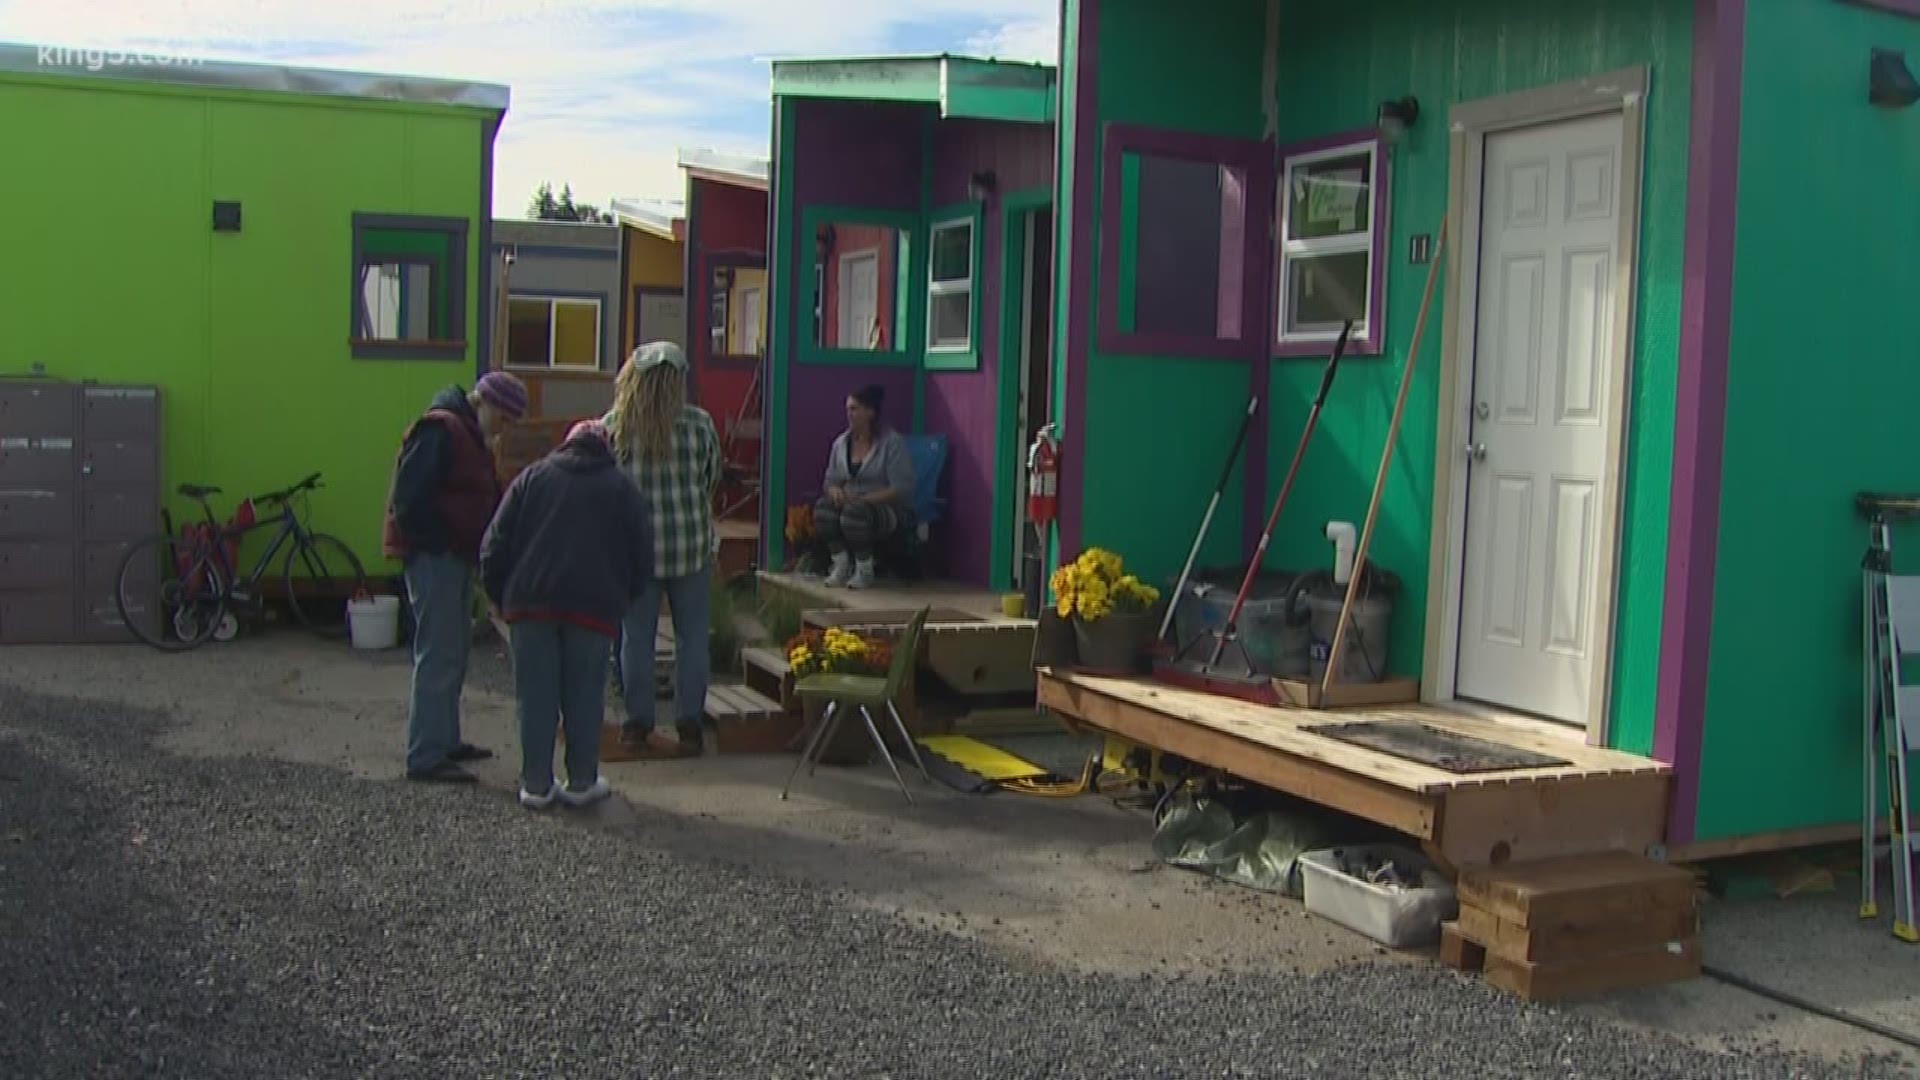 A senior leader with Bellingham's Unity Village, a temporary tiny home community for the homeless, is accused of stealing about $8,000 from the organization.